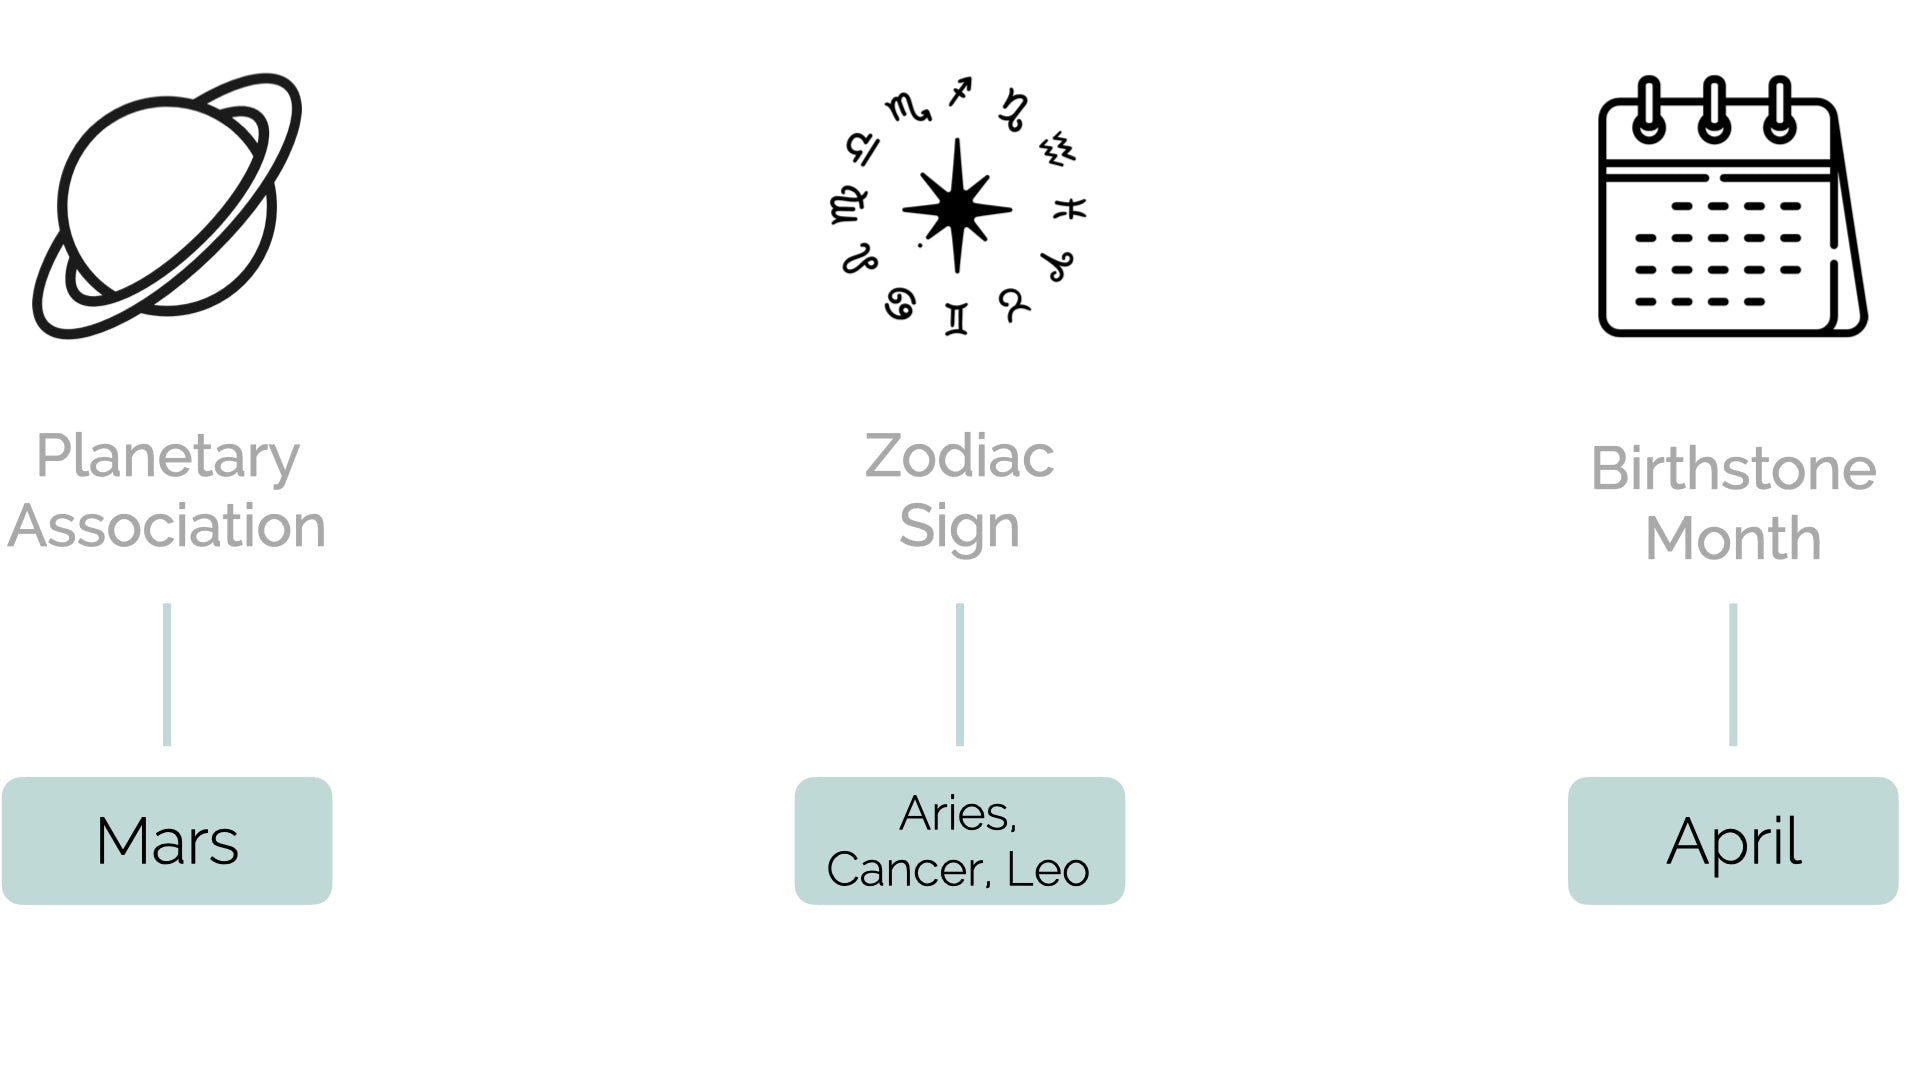 Diagram depicting the planetary association, birthstone month, and zodiac sign for Red Corals (Moonga)